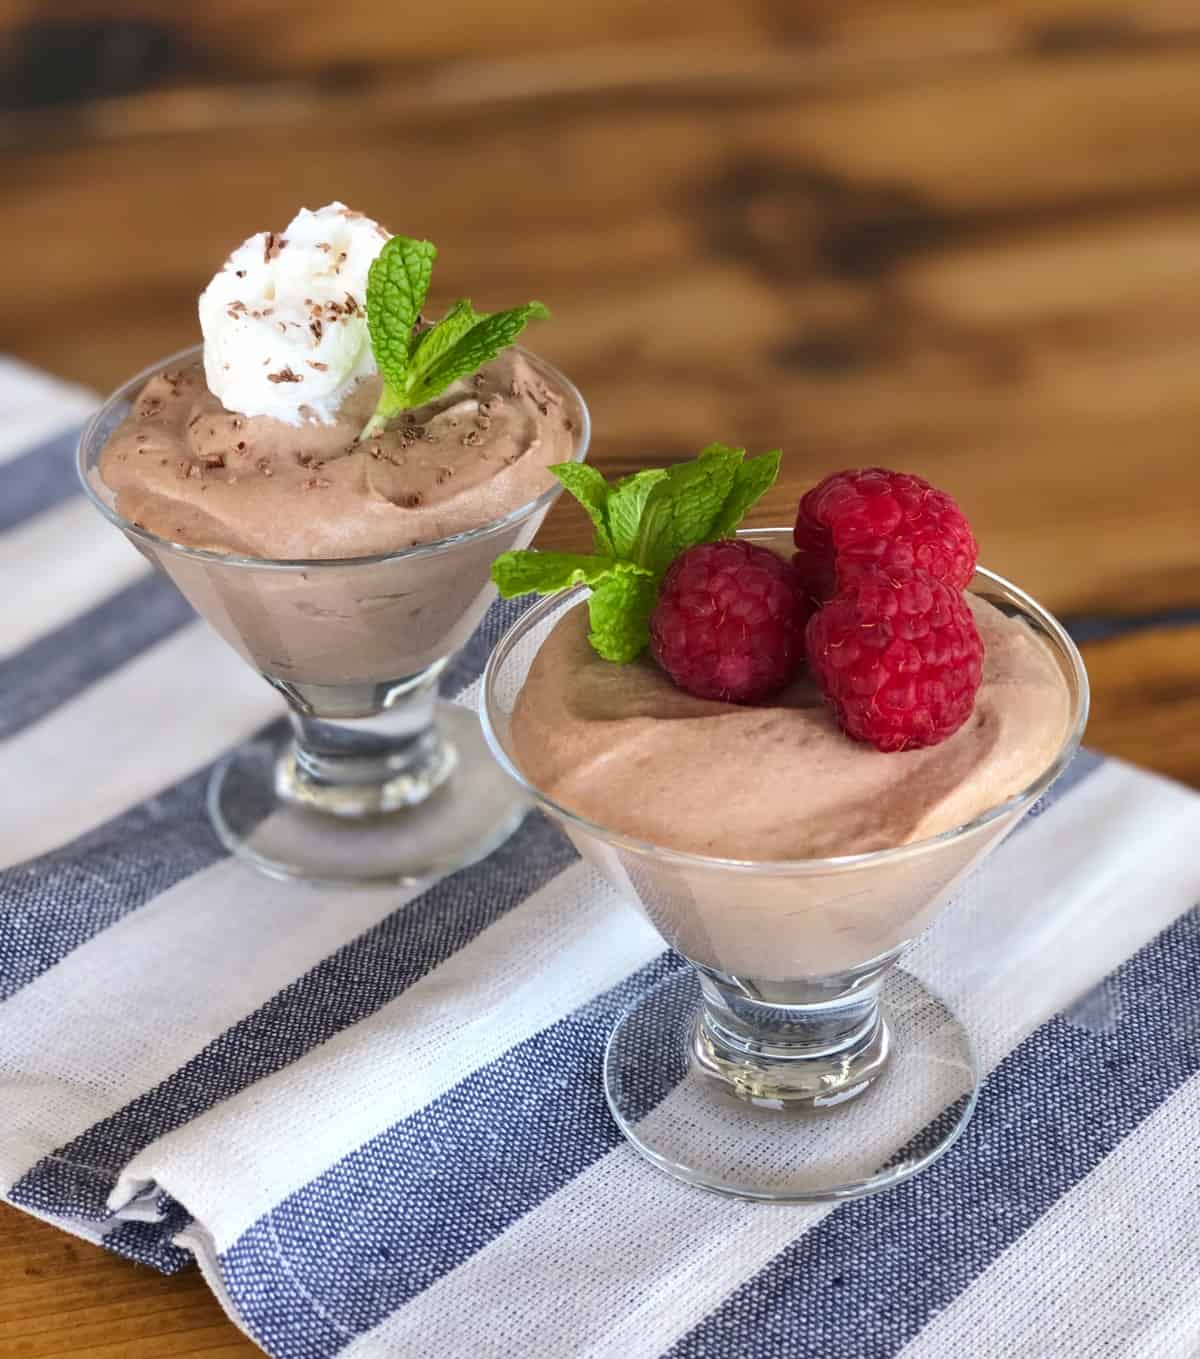 Two dessert glasses with Nutella mousse - one topped with fresh raspberries and mint, the other topped with whipped cream, chocolate shavings and mint.